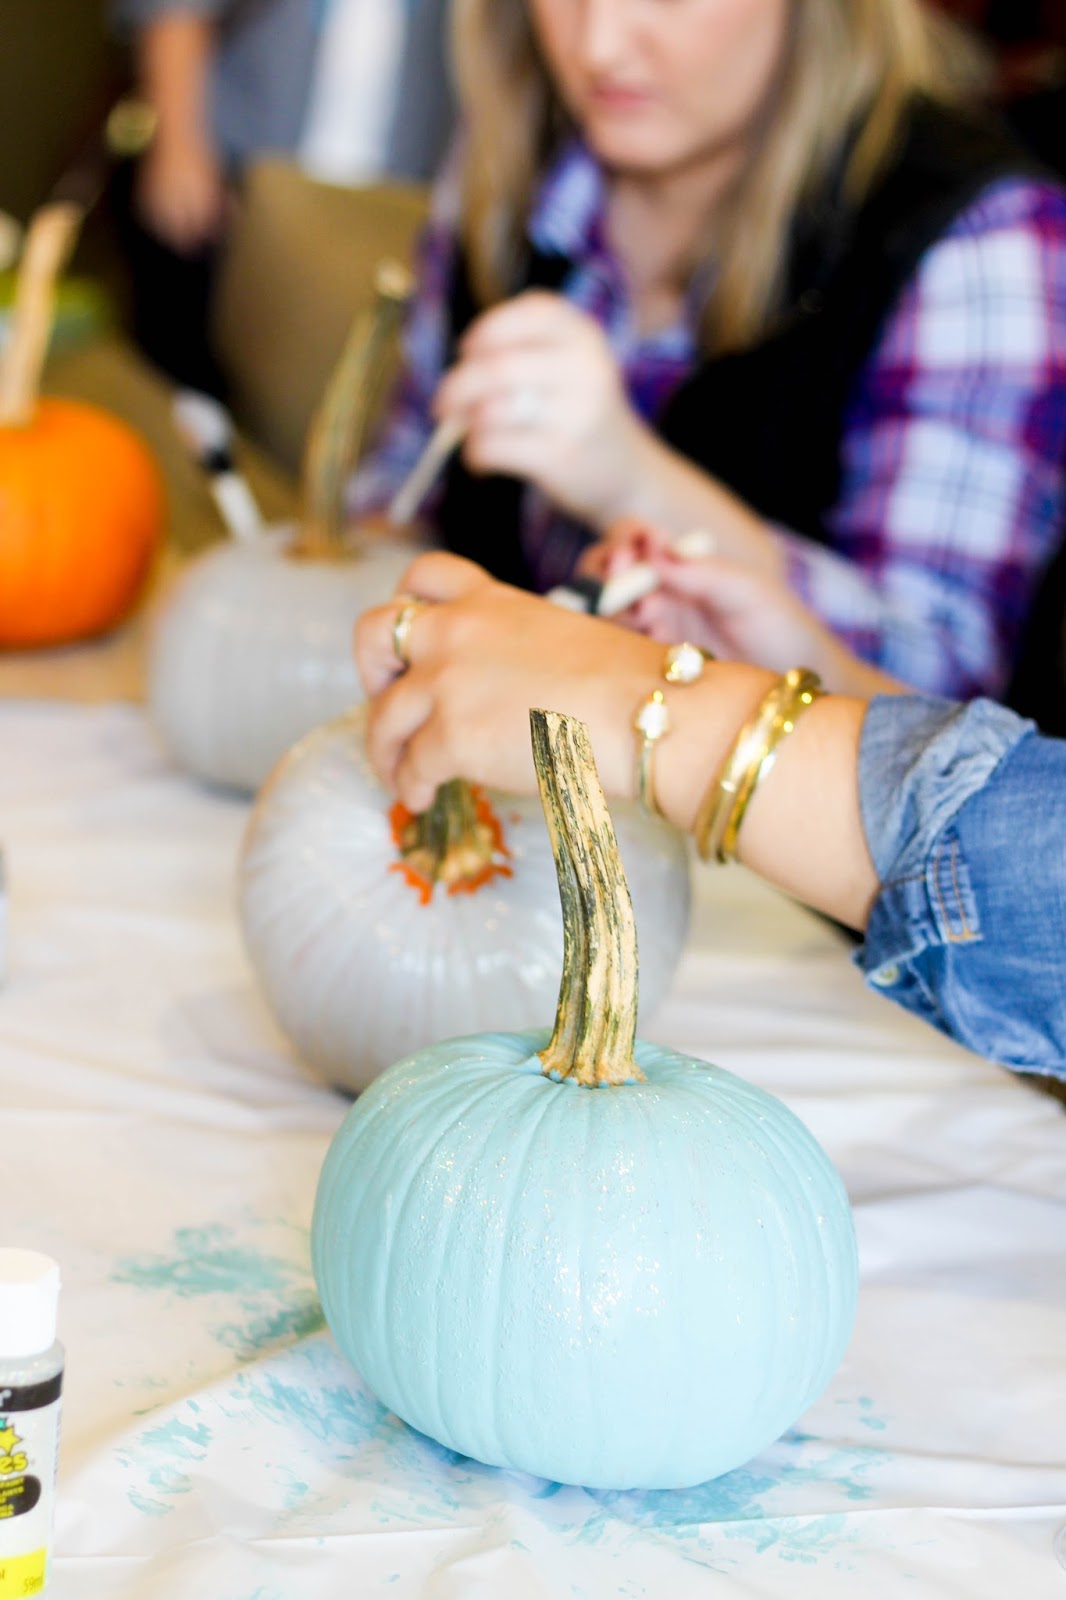 chalk paint on pumpkins, painting pumpkins with chalk paint, annie sloan chalk paint on pumpkins, fall party, hosting a fall brunch party, pumpkin painting party ideas, fall party ideas, mr. clean concentrated cleaner, pretty in the pines blog, raleigh, north carolina